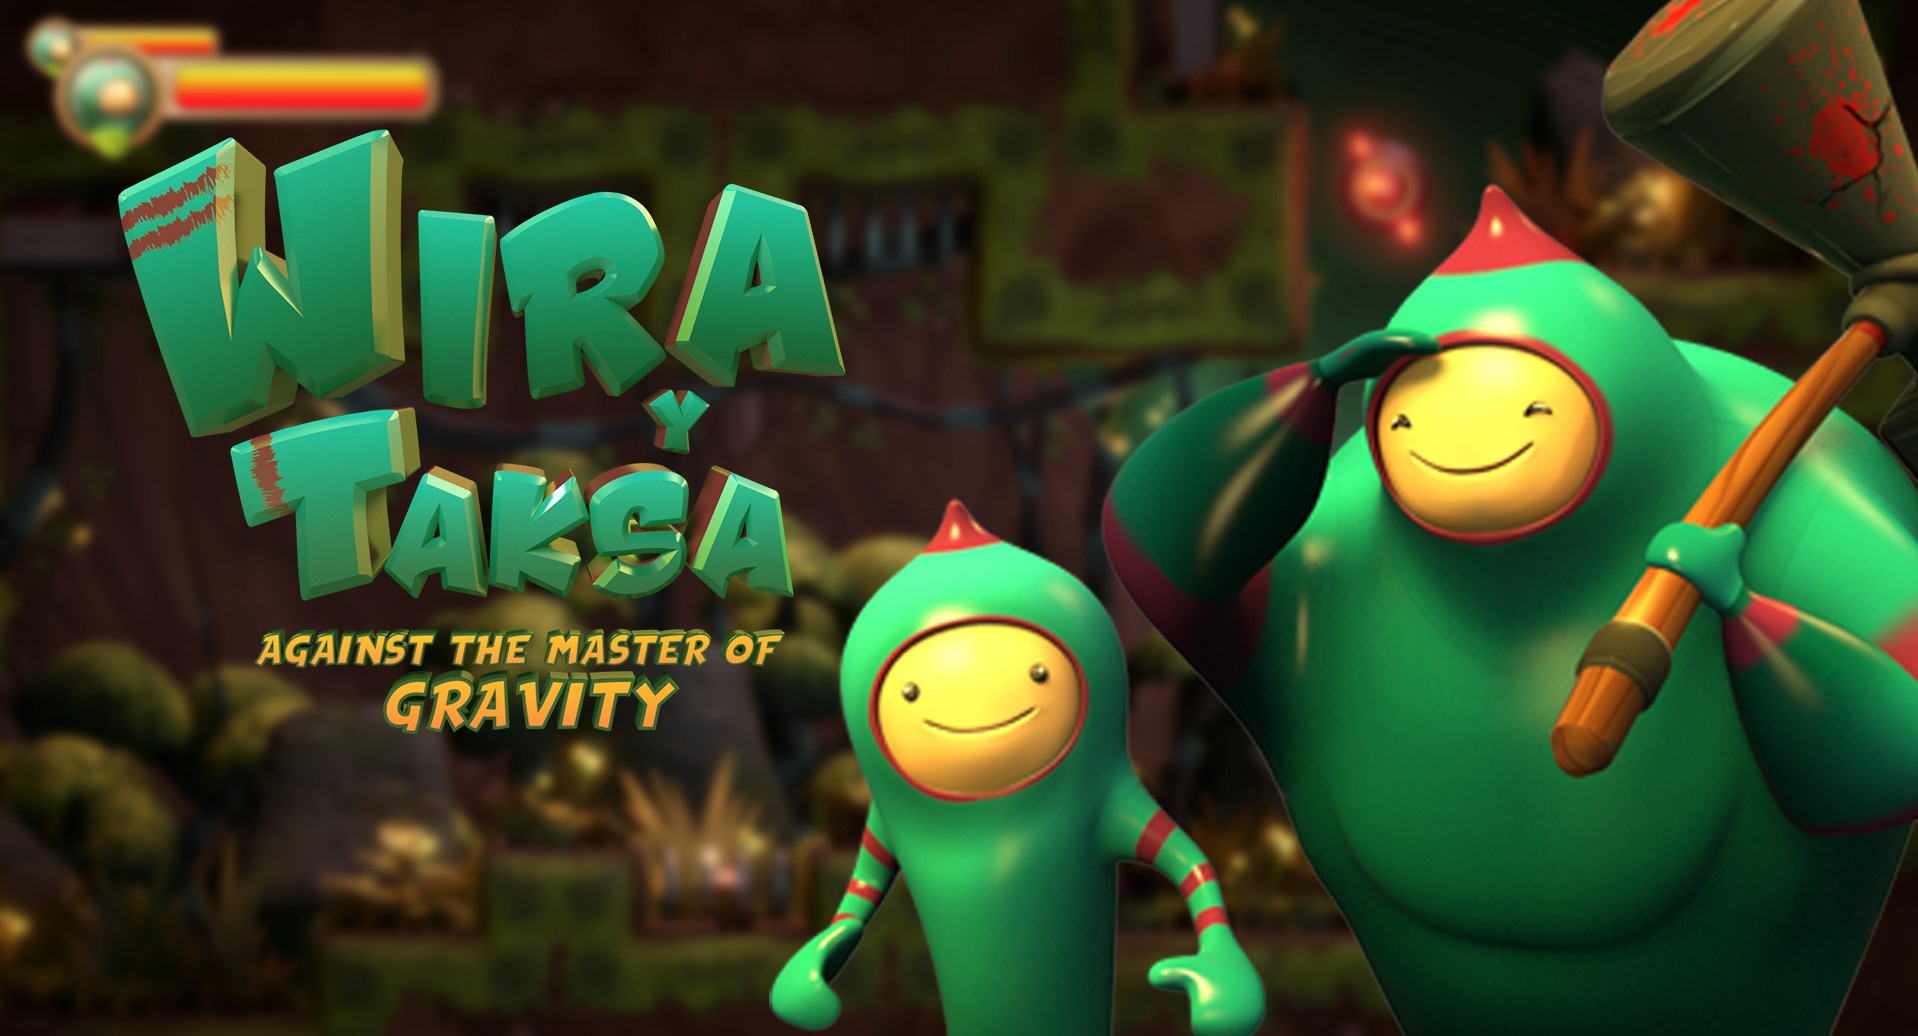 Wira & Taksa: Against the Master of Gravity Free Download